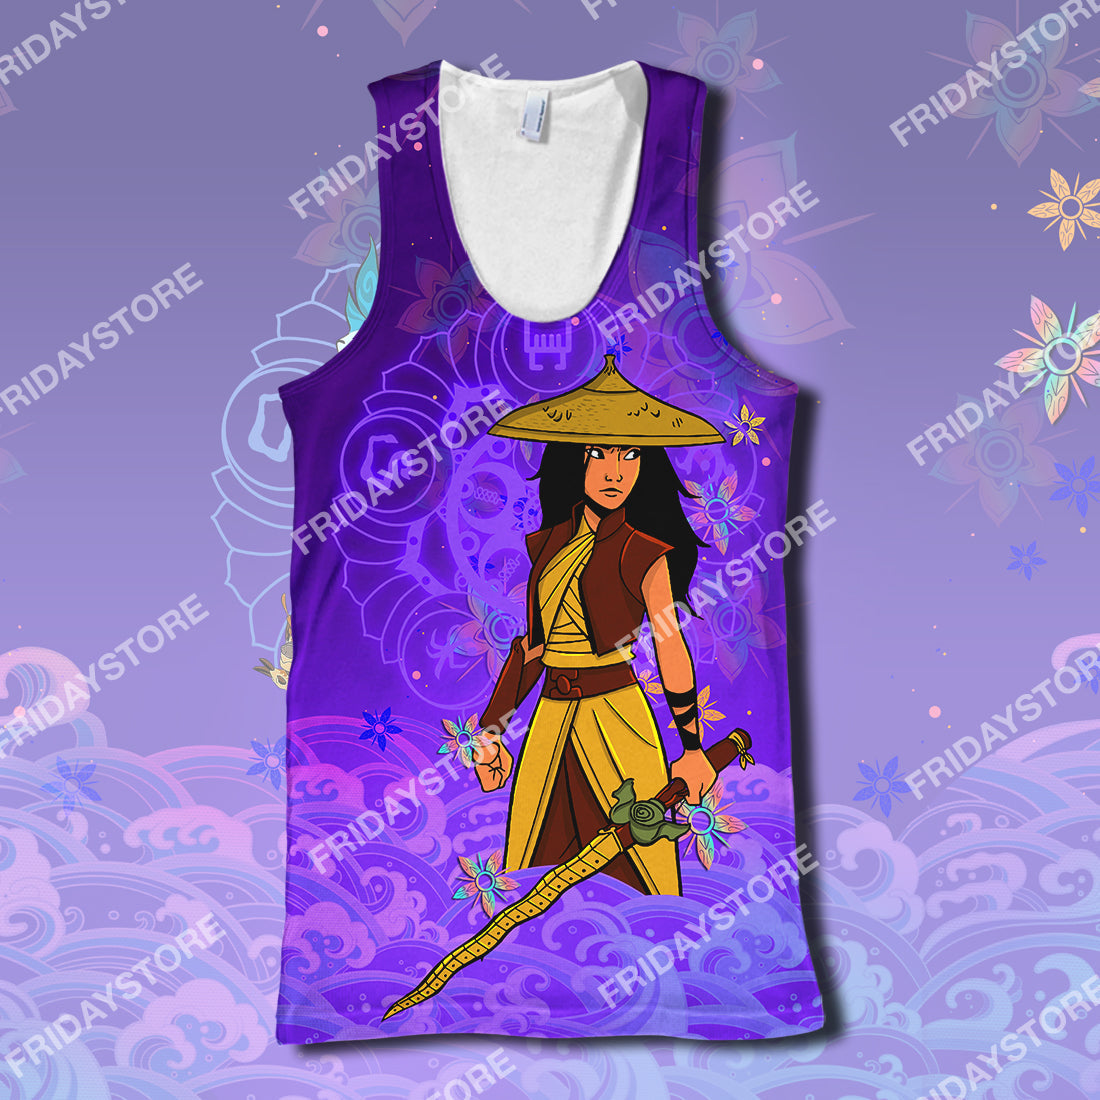 Unifinz DN T-shirt Princess And The Last Dragon T-shirt Awesome High Quality DN Shirt Sweater Tank 2025